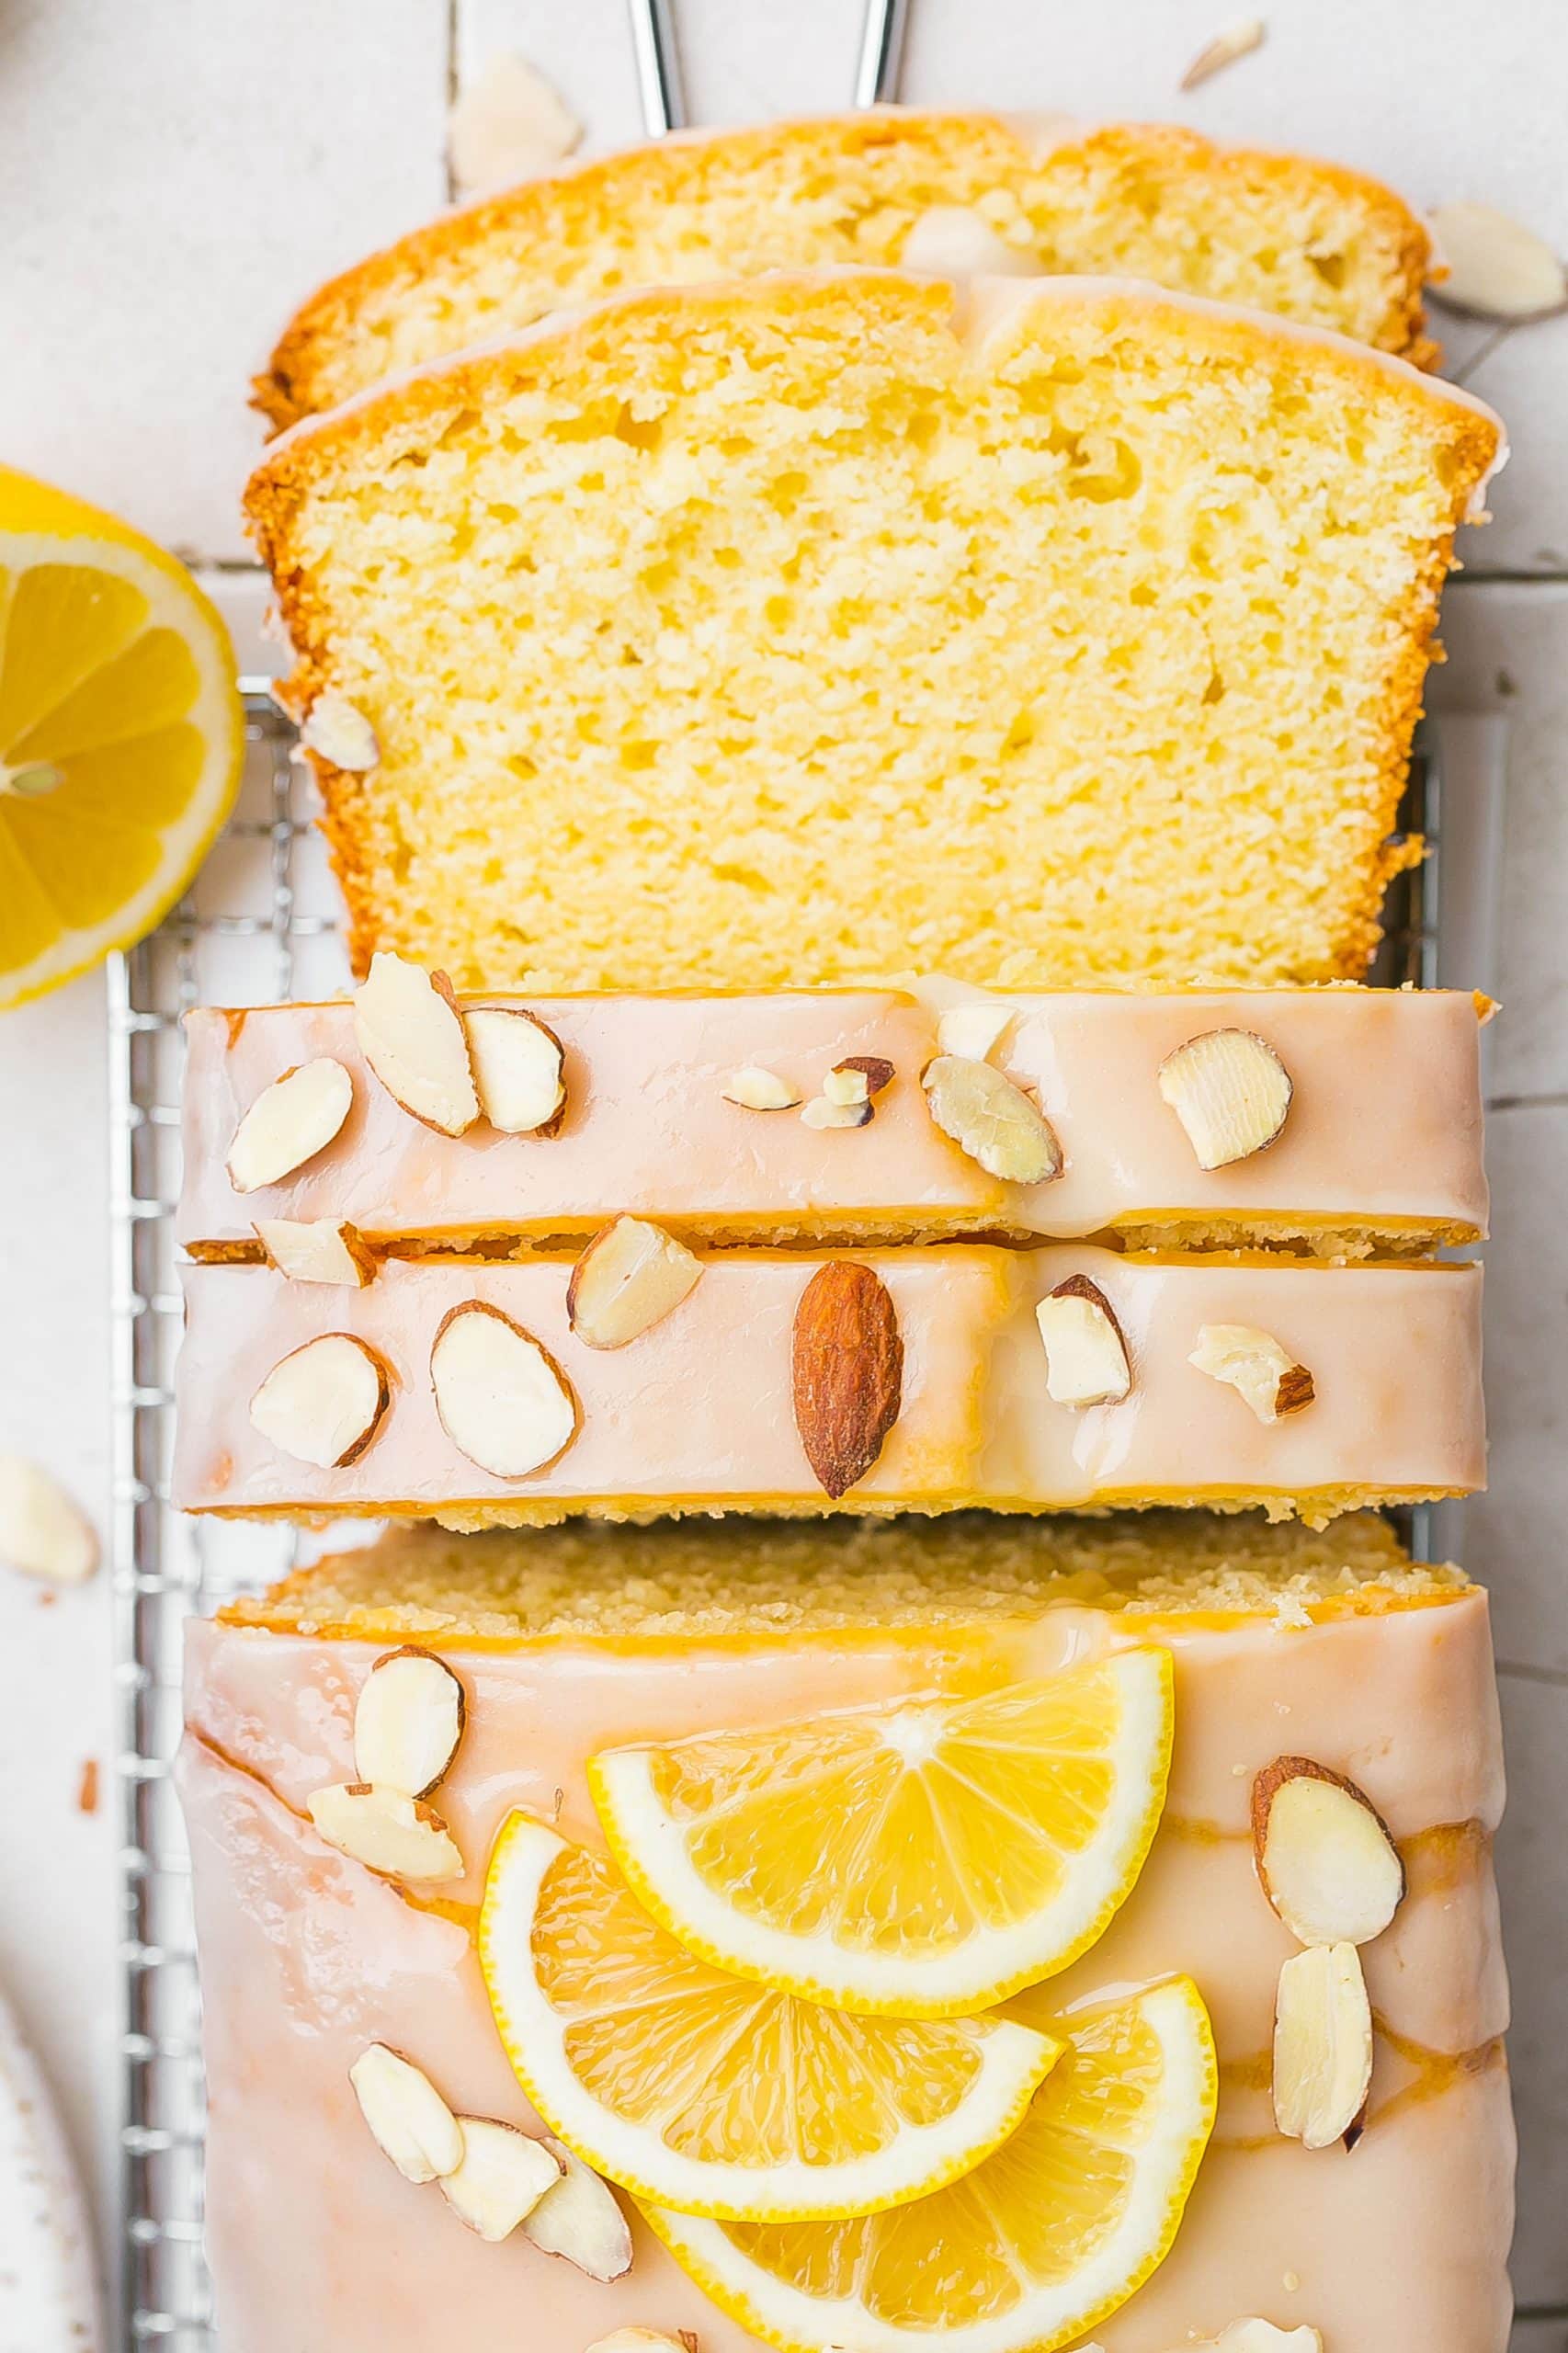 Iced loaf cake with icing and almonds.